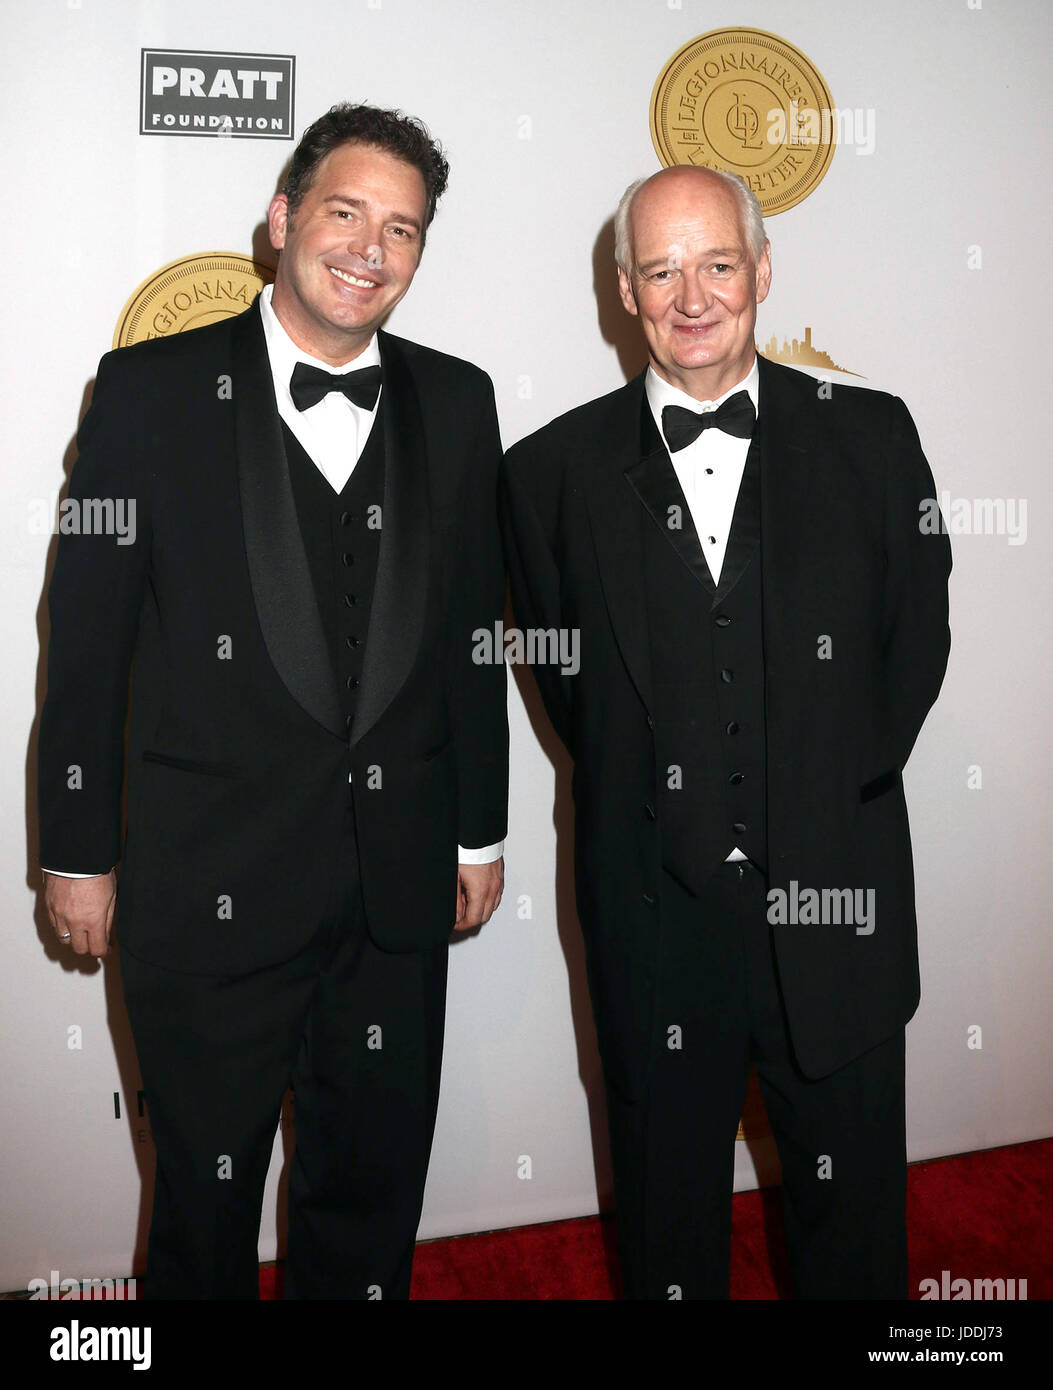 New York, New York, USA. 19th June, 2017. Comedians BRAD SHERWOOD and COLIN MOCHRIE attend the Legionnaires of Laughter Gala held at Cipriani Wall Street. The celebrity/sports memorabilia auction was held to benefit Jerry's House, a charity created by comedian Jerry Lewis to help children with health & special needs. Credit: Nancy Kaszerman/ZUMA Wire/Alamy Live News Stock Photo